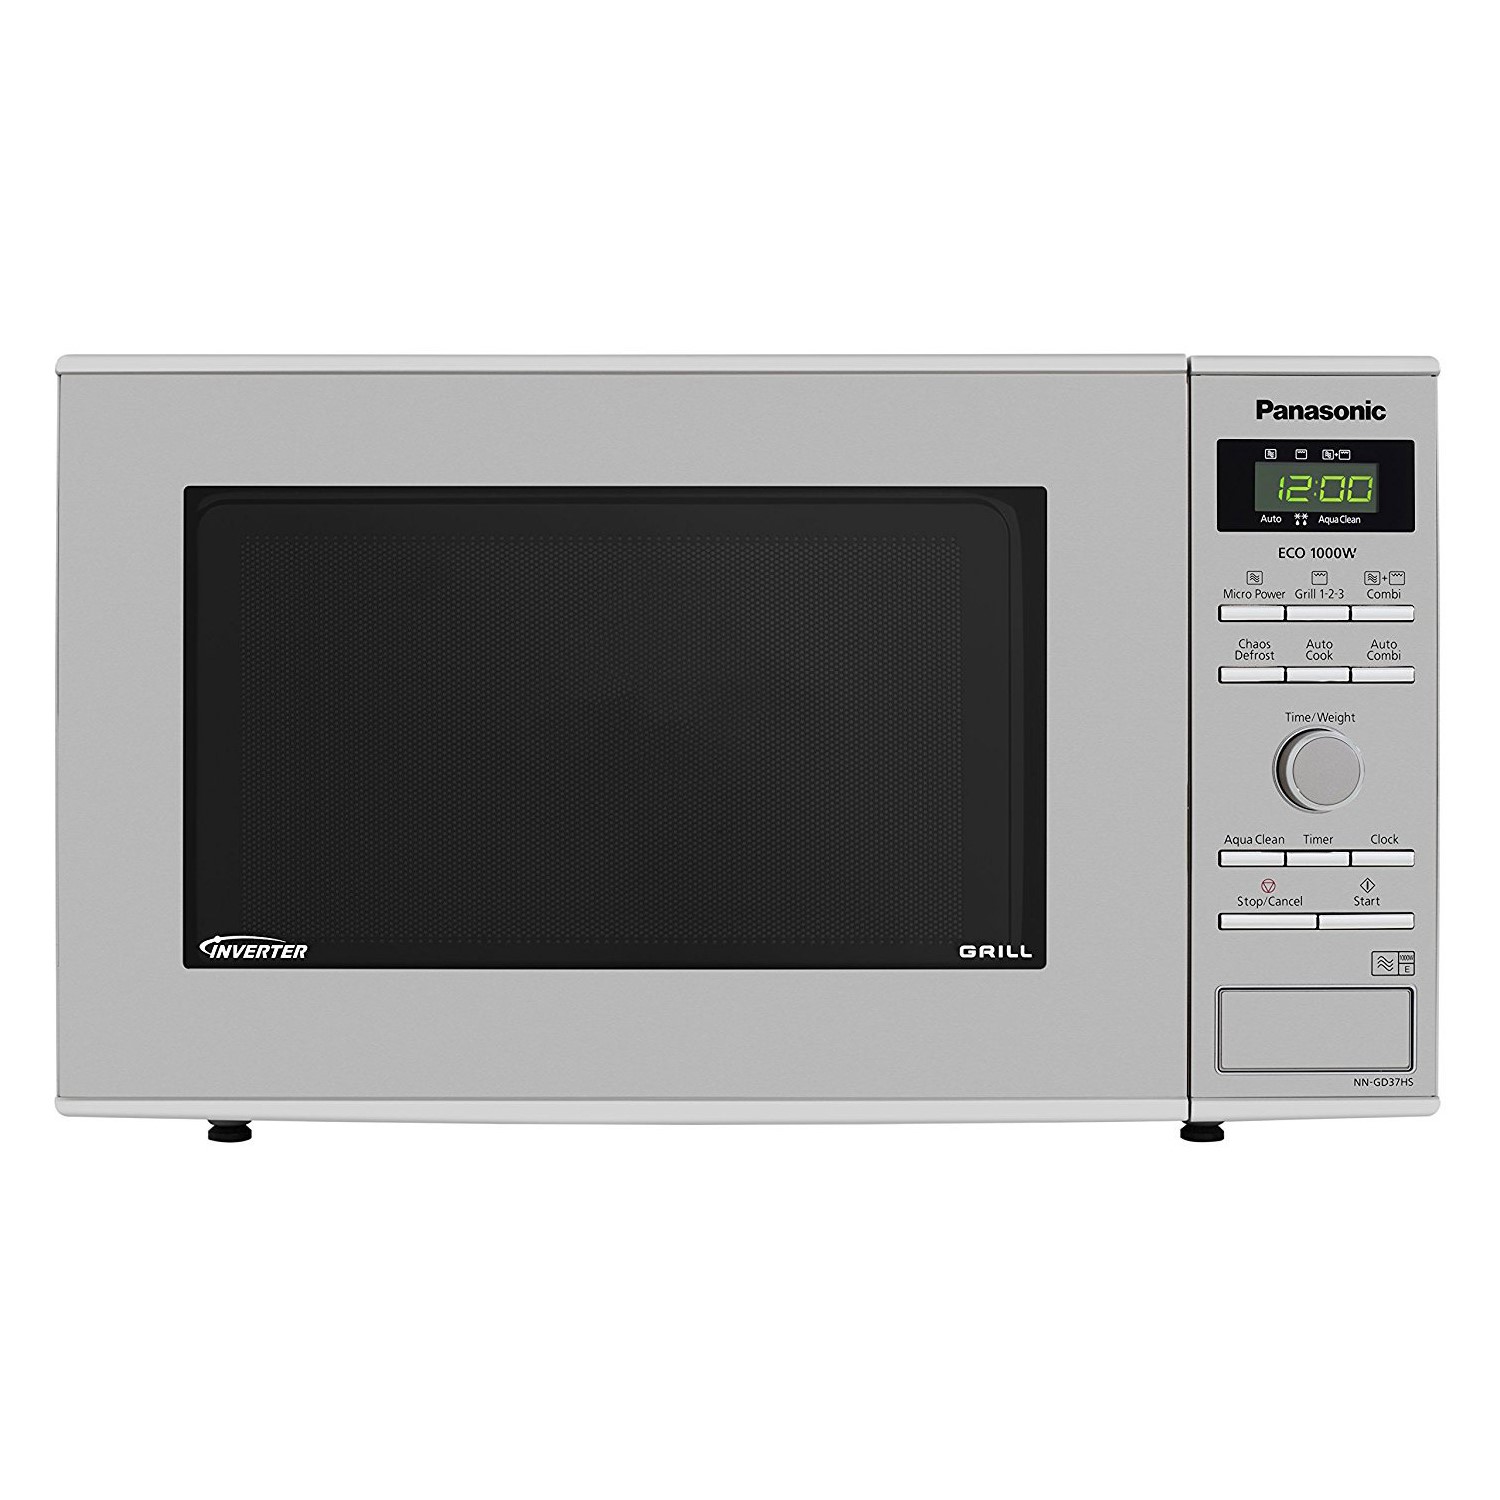 Panasonic 23L Inverter Microwave And Grill - Stainless Steel